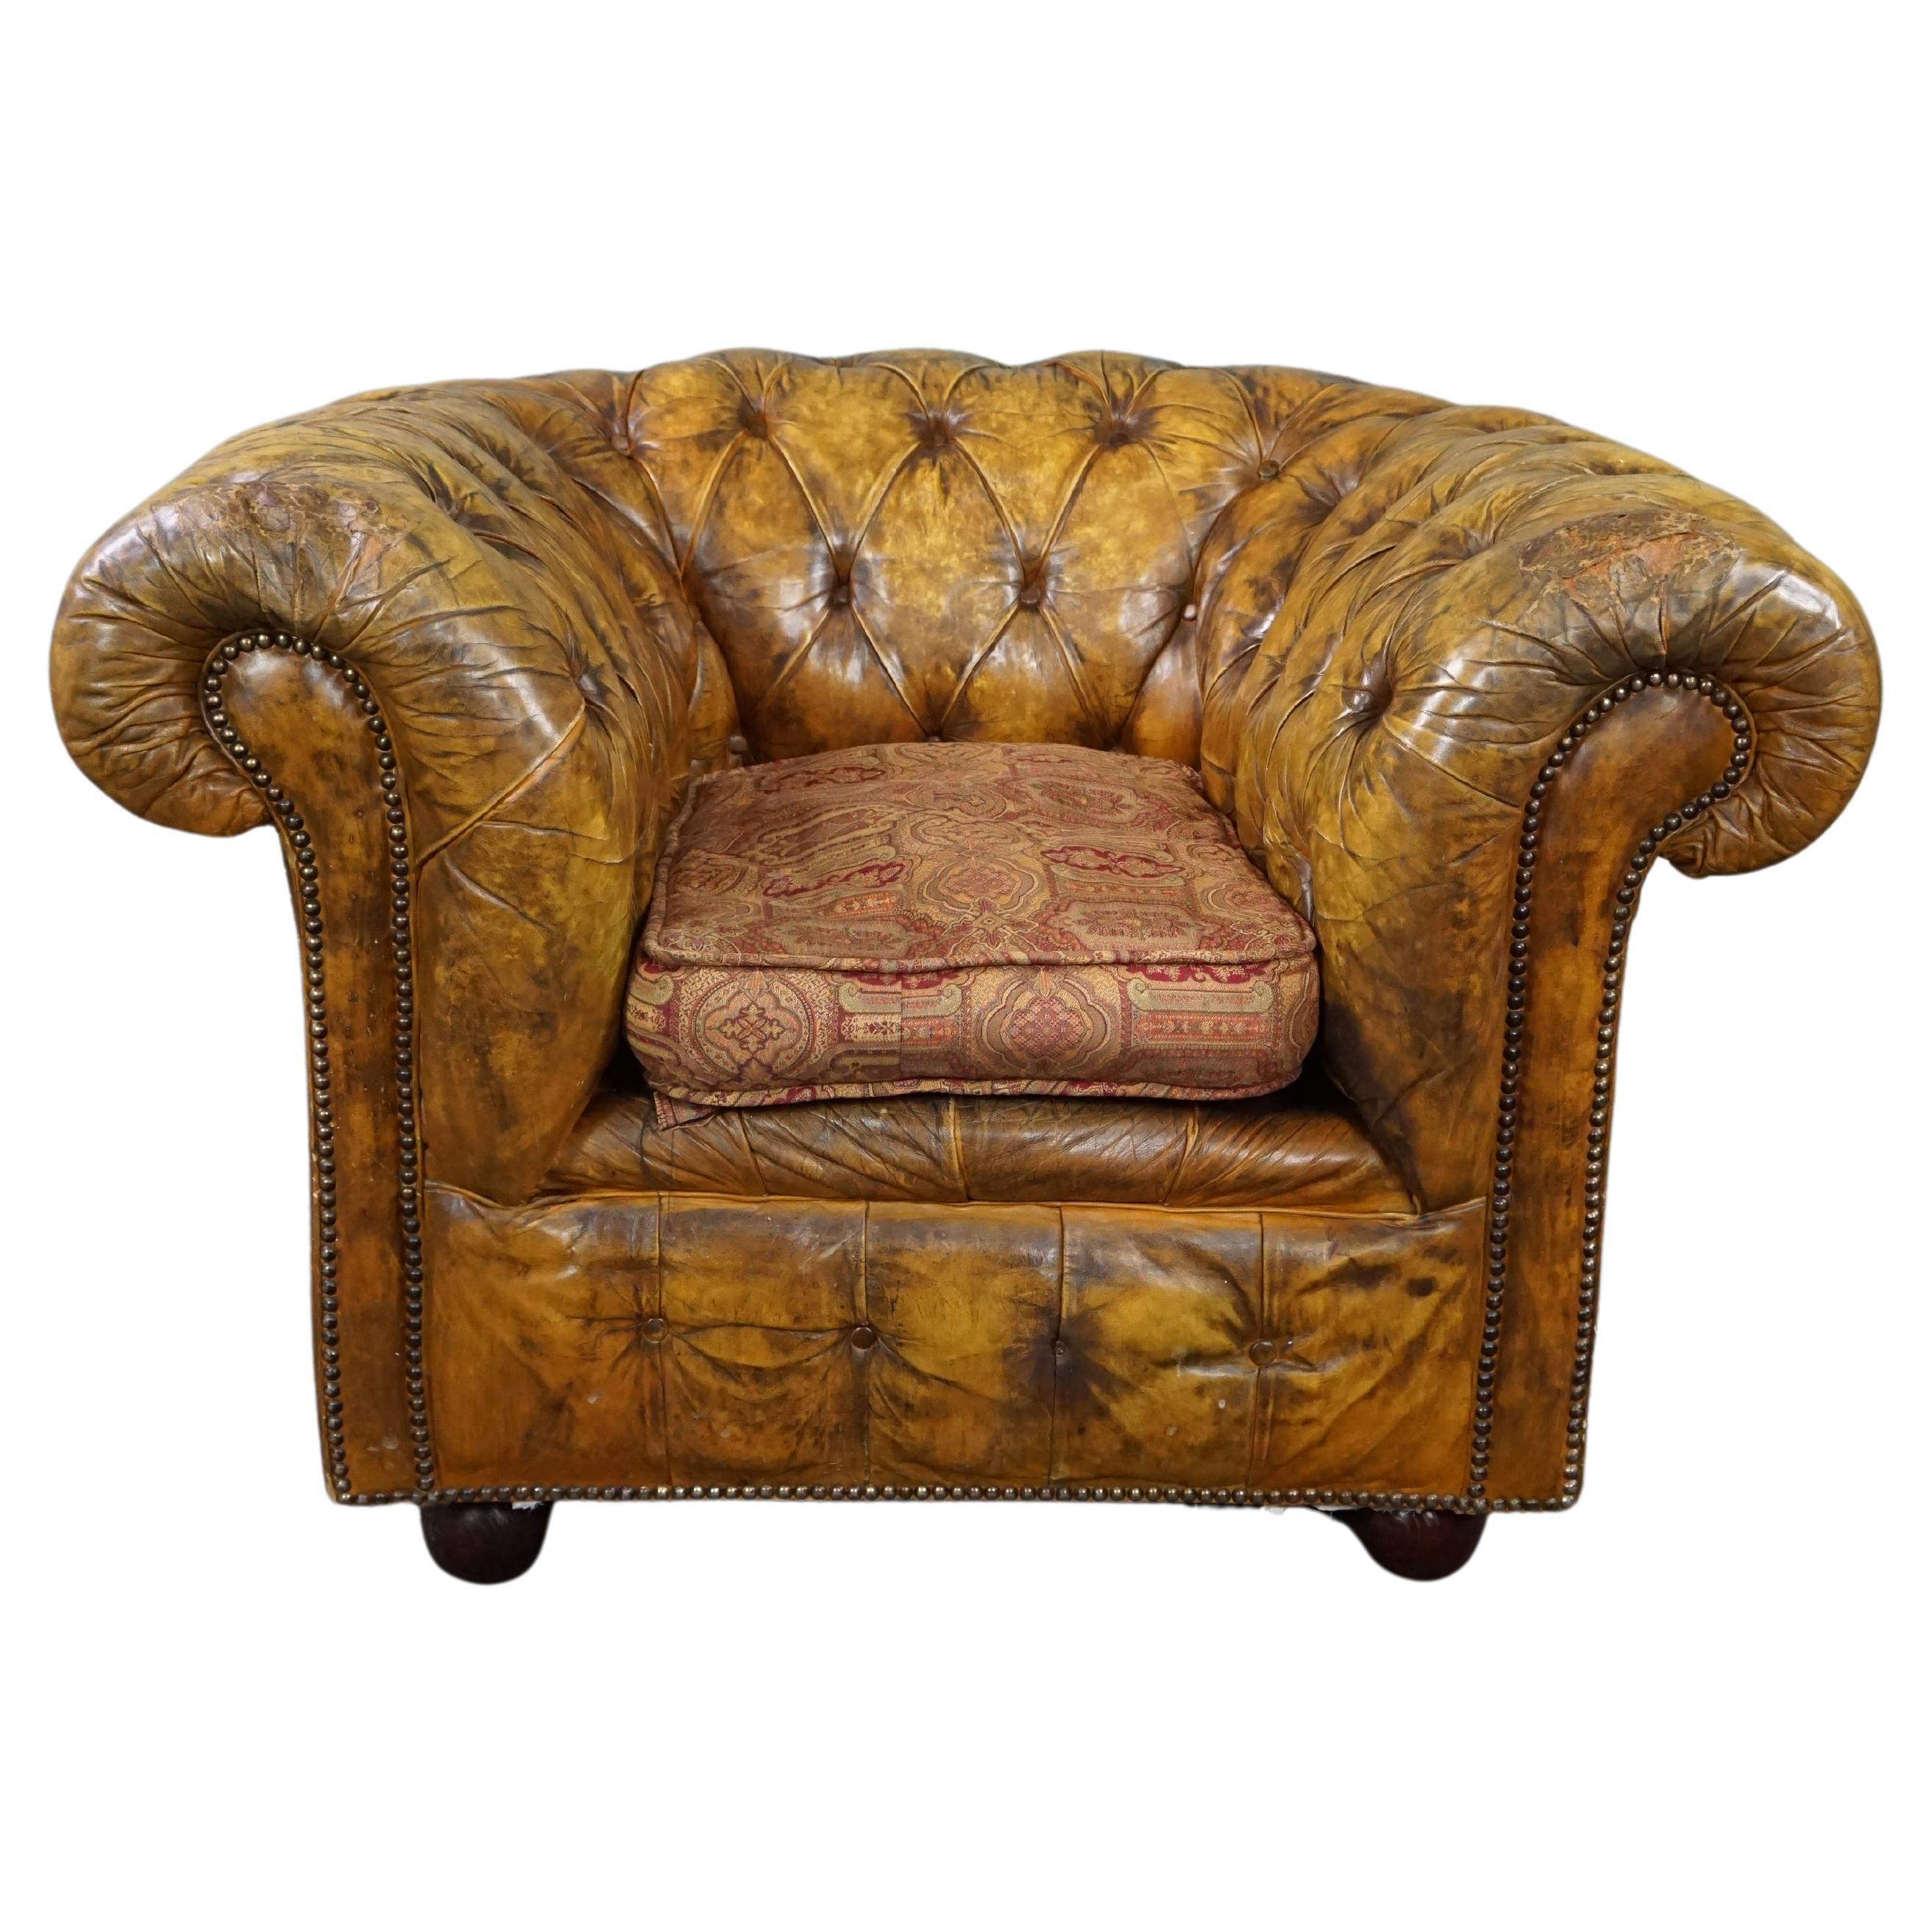 Very beautiful old Chesterfield armchair full of patina For Sale